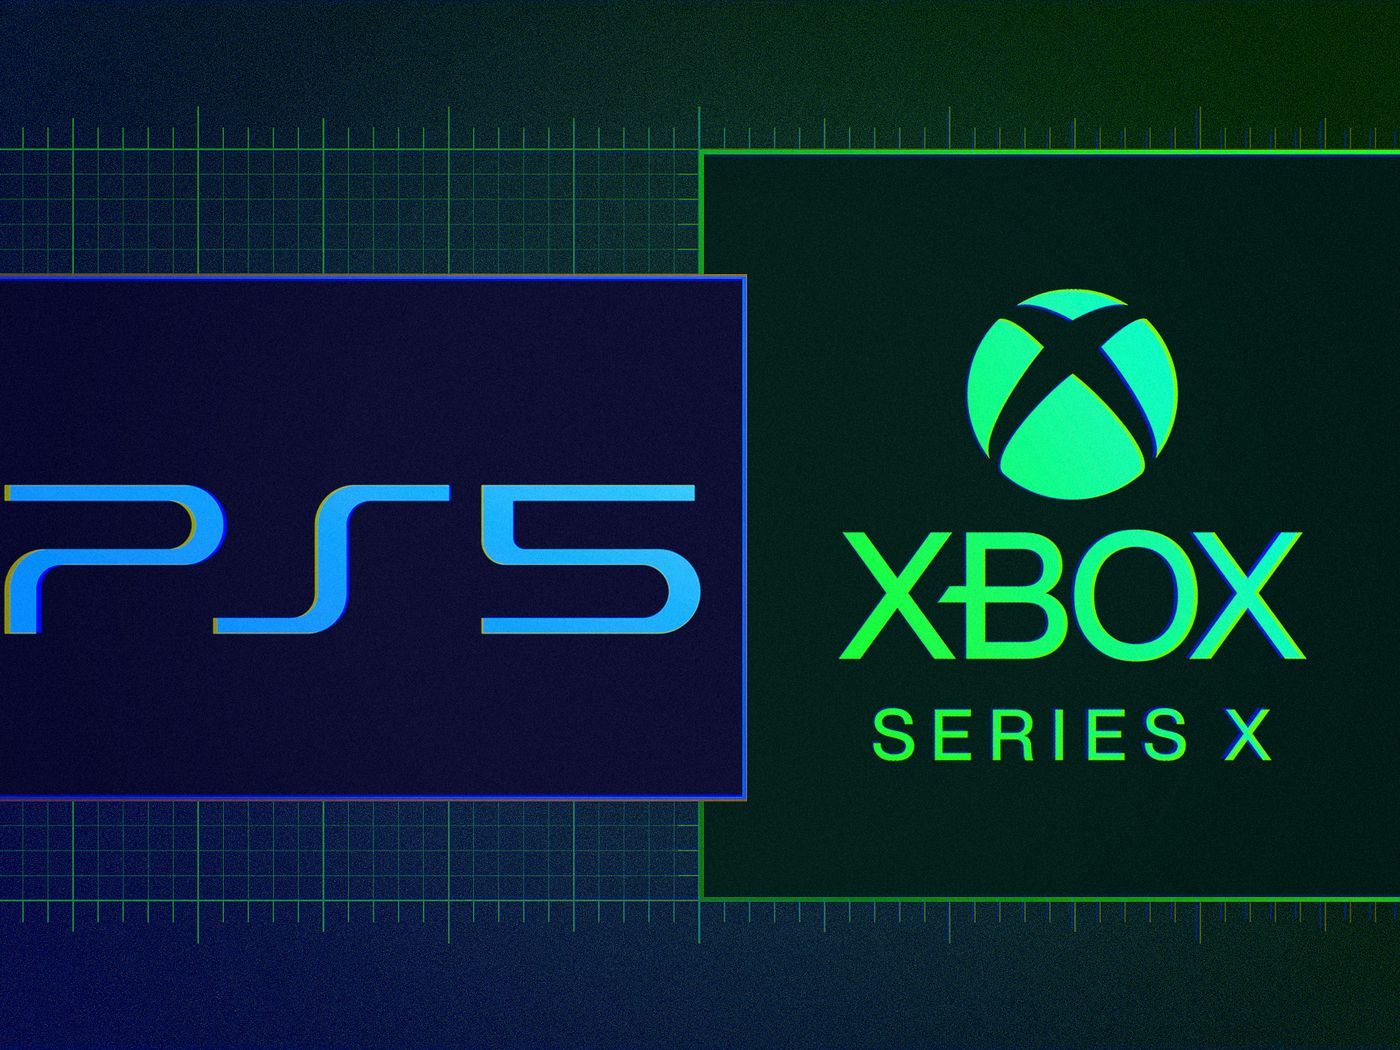 PS5 and Xbox Series X hardware specs: comparing CPU, GPU, SSD